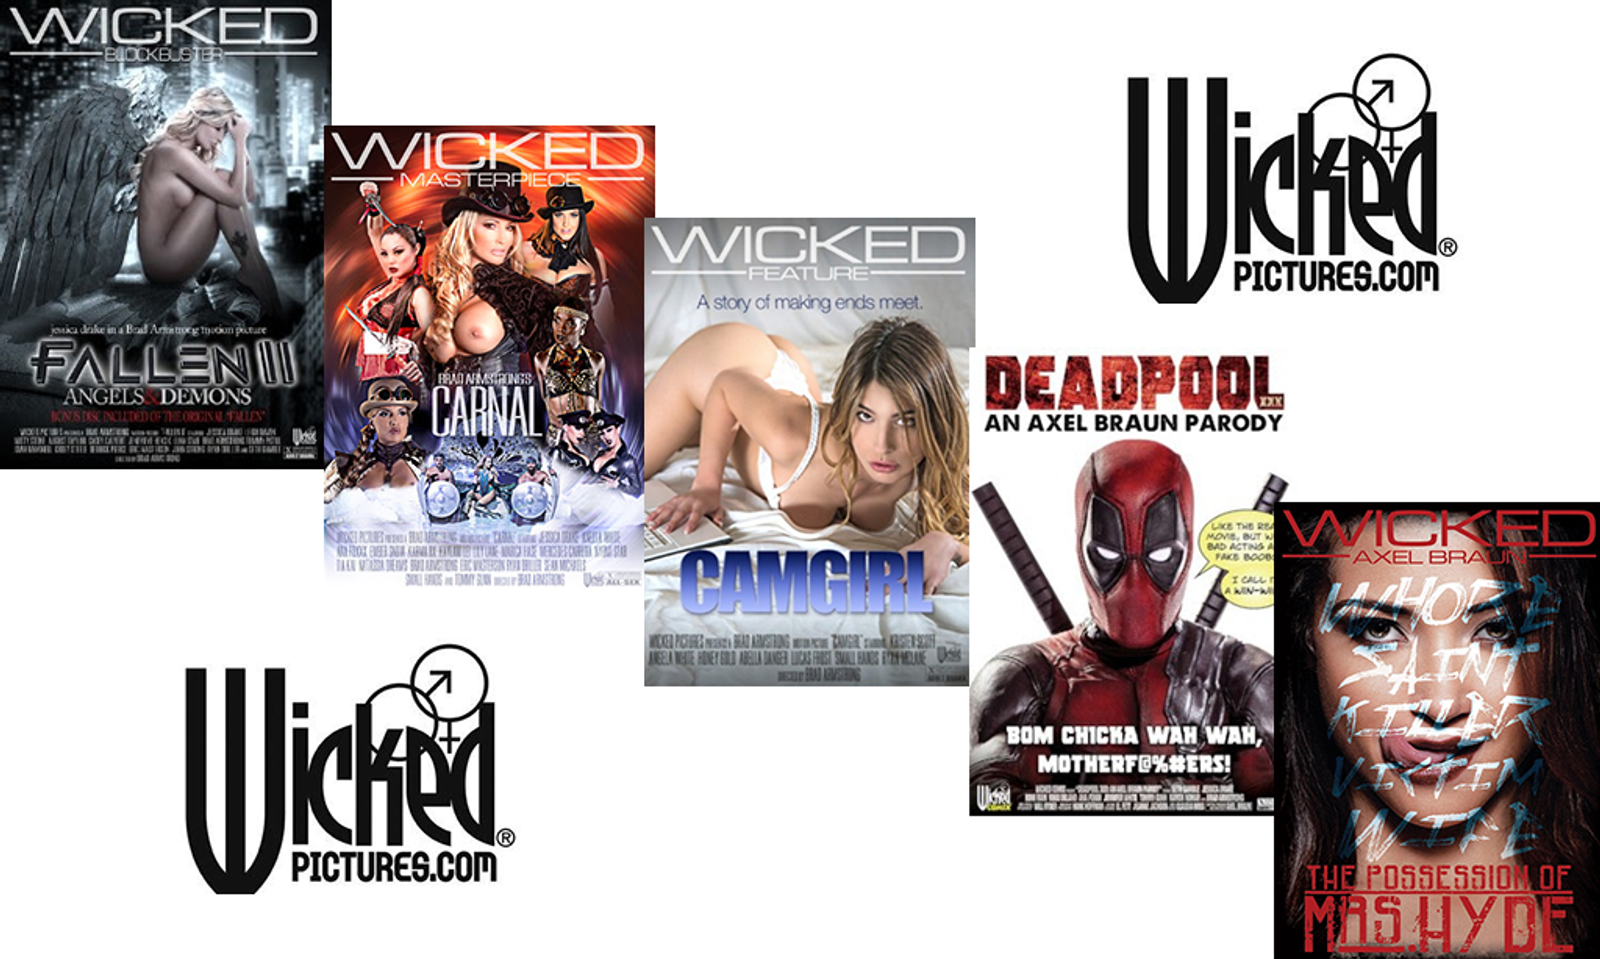 Wicked & Associated Lines Receive Over 100 2019 AVN Award Noms